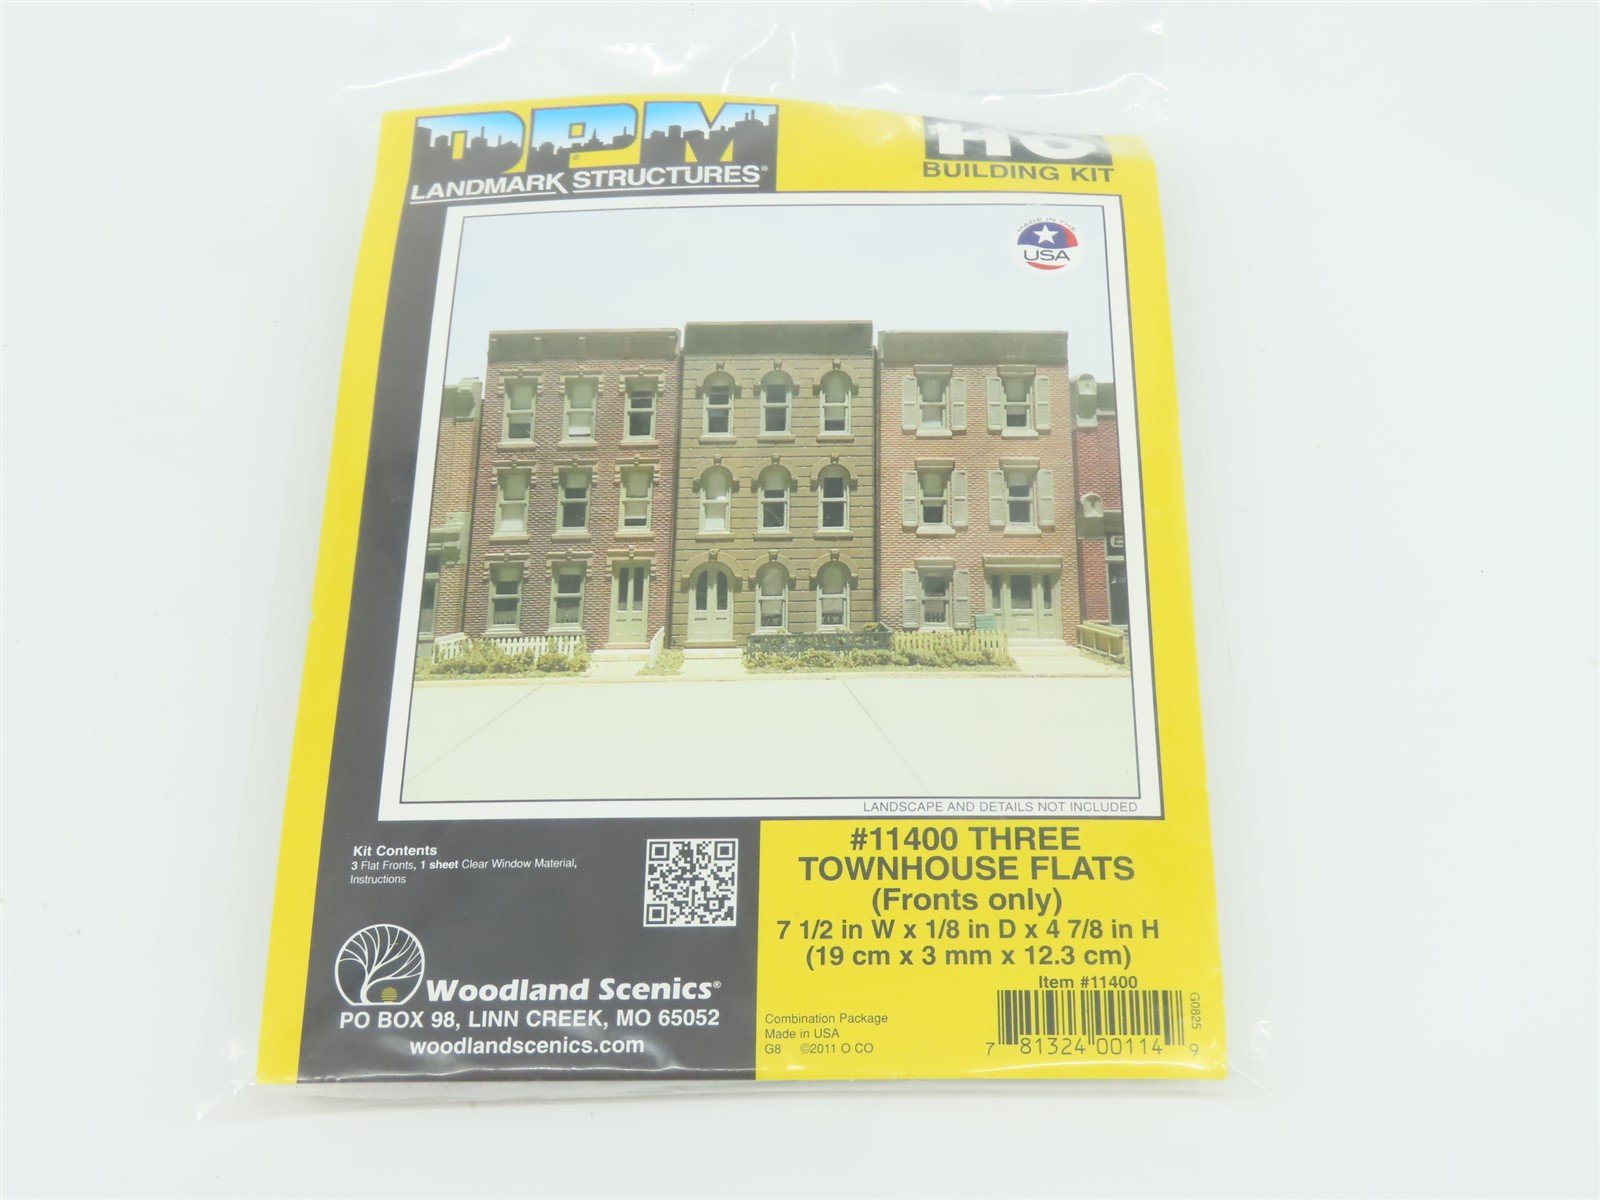 HO Woodland Scenics DPM Kit #11400 3 Townhouse Flats (Fronts Only) - Sealed